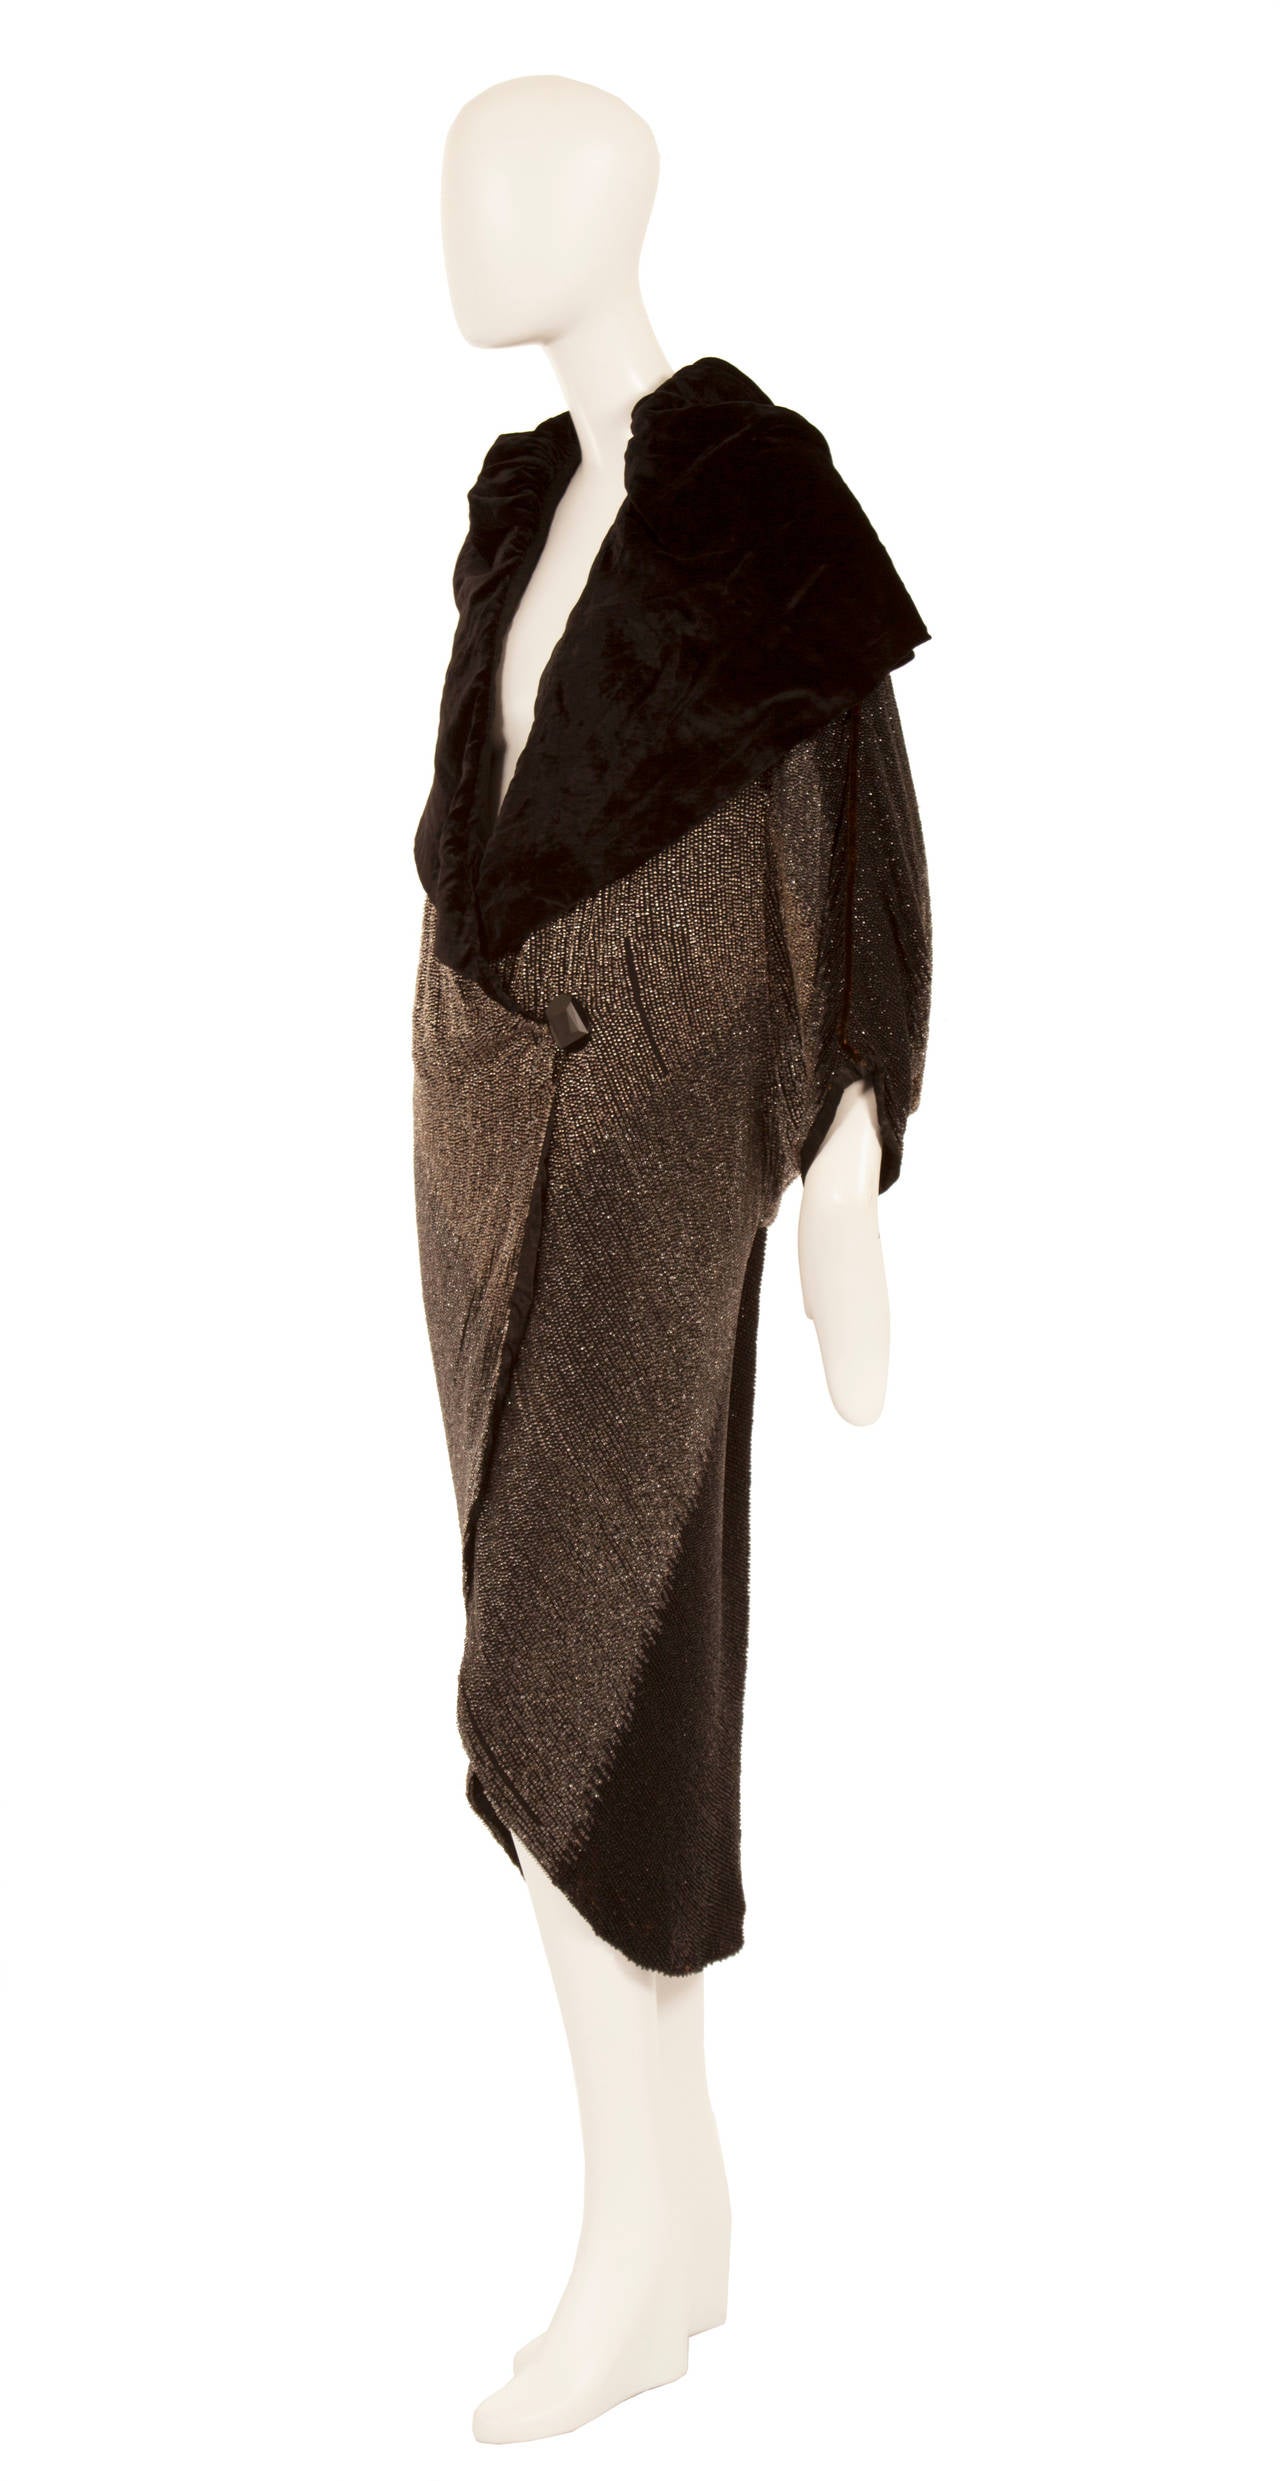 This exquisite coat is an exceptional piece of early 20th century haute couture by Paul Poiret. Hand beaded with thousands of tiny bugle beads, the coat has an ombre effect, fading from black through to light grey, and features an oversized shawl